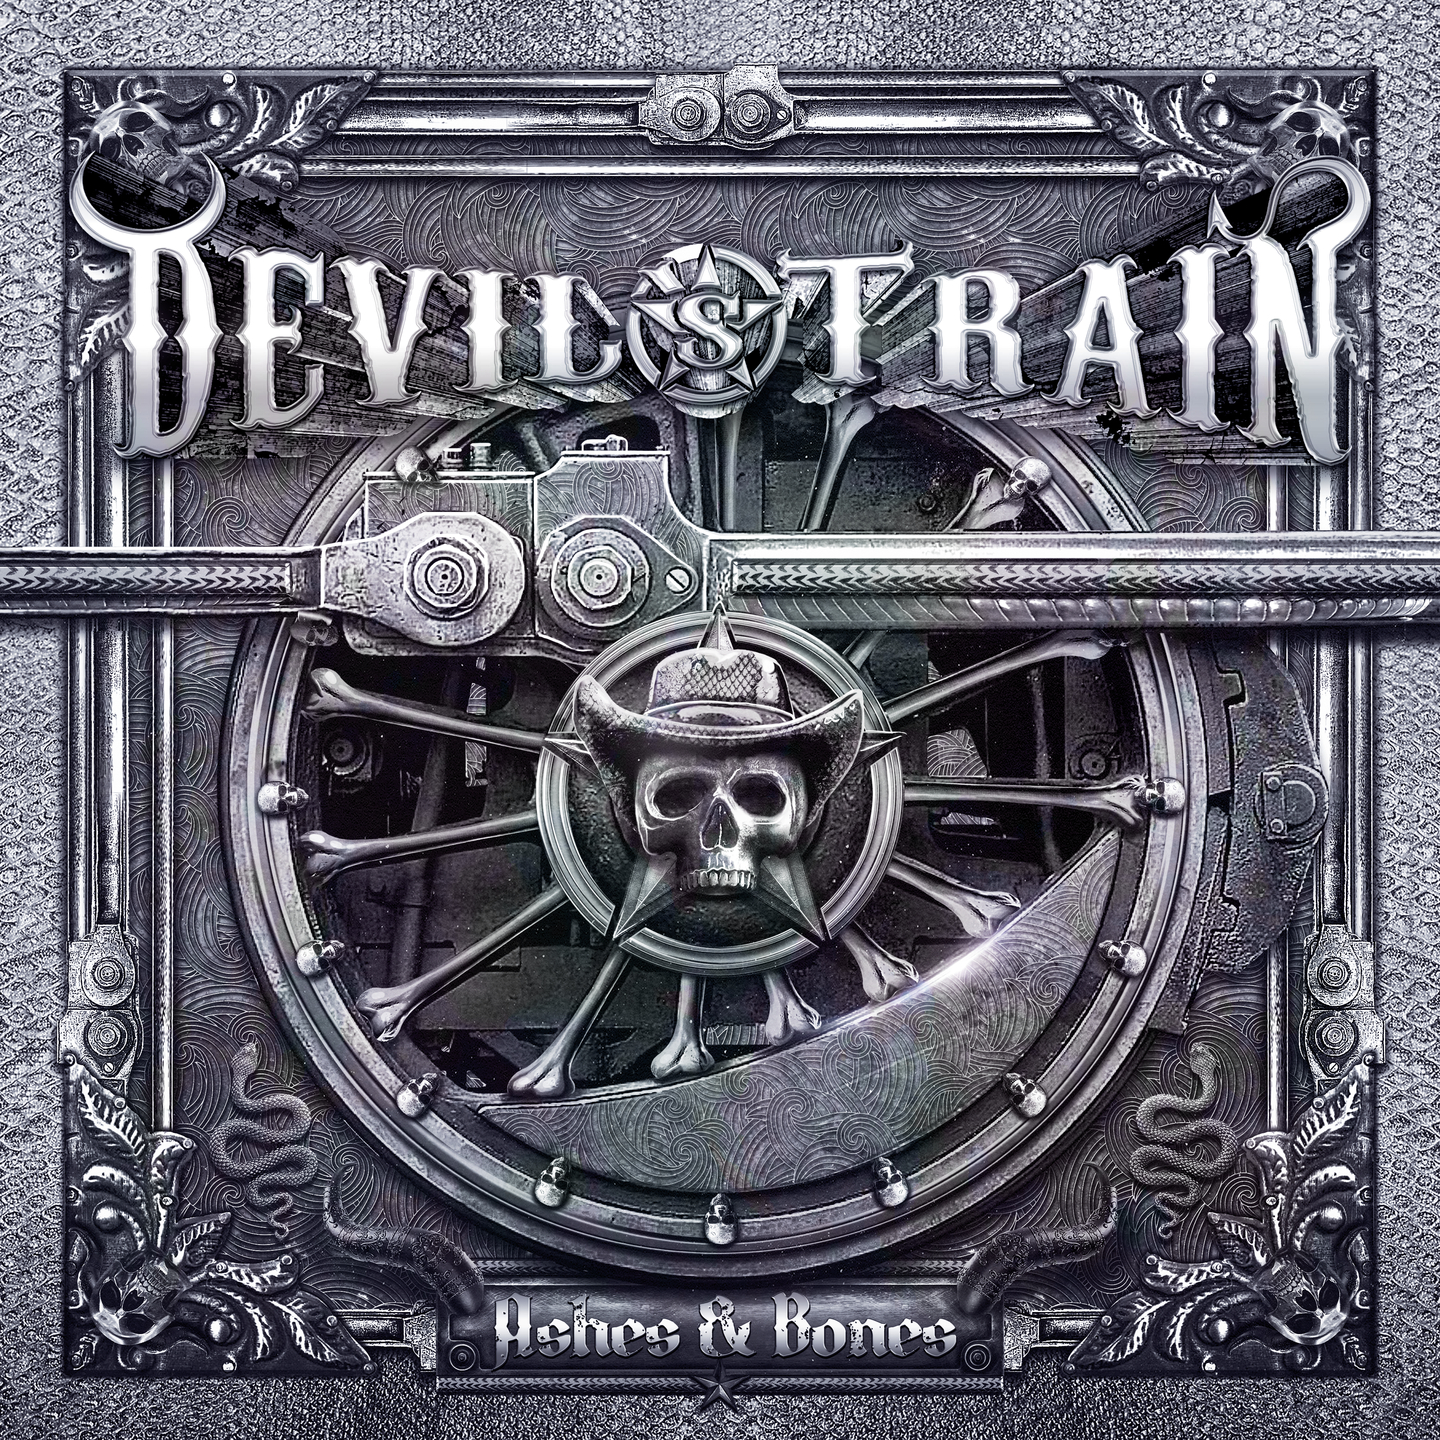 Devil’s Train Bring Back Sleazy Hard Rock With New Video For "The Devil & The Blues"